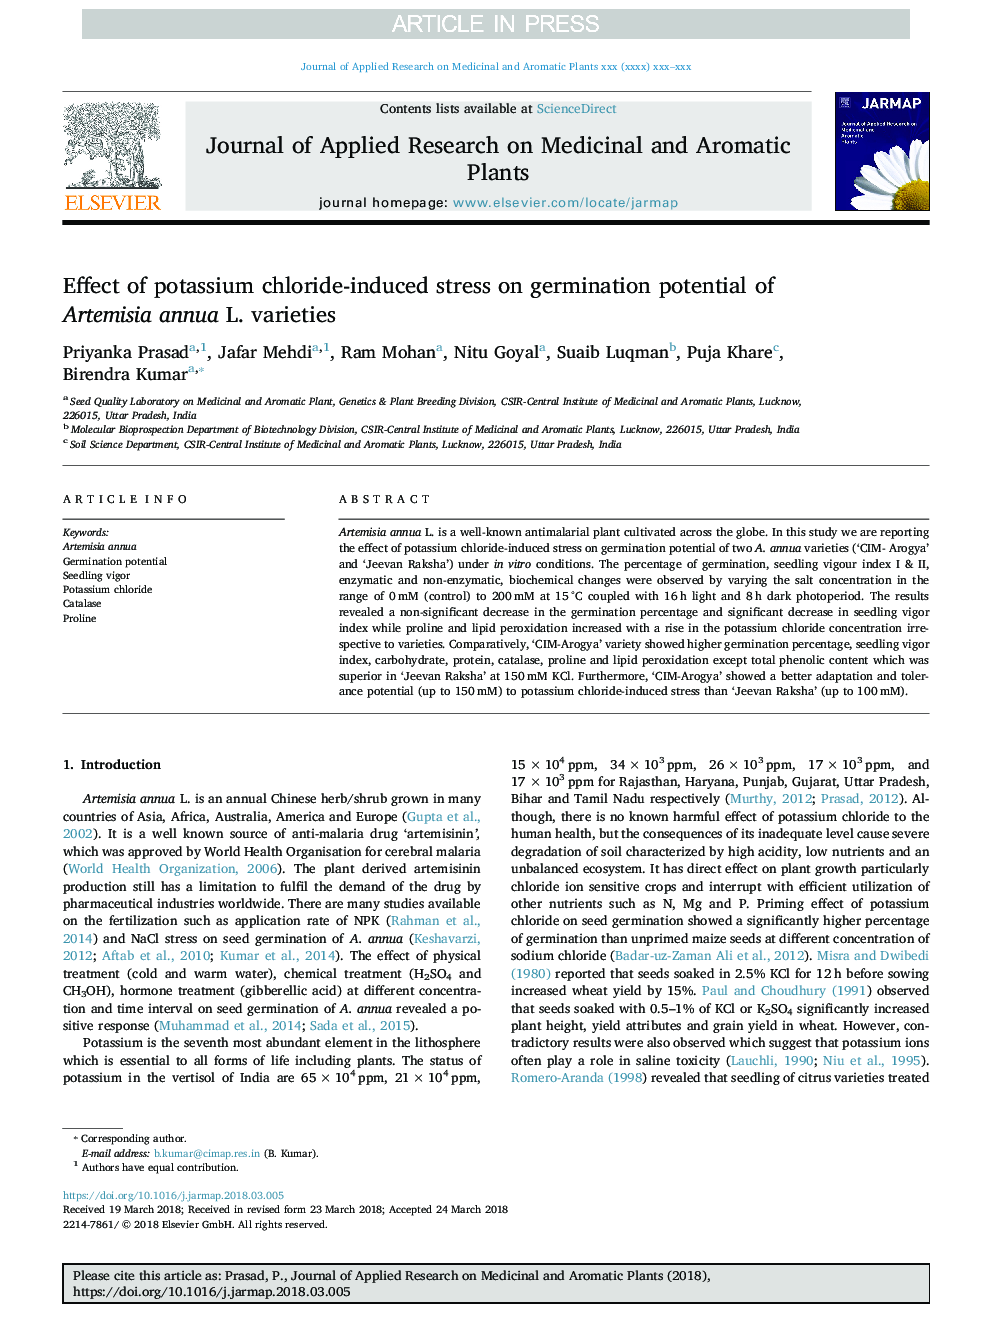 Effect of potassium chloride-induced stress on germination potential of Artemisia annua L. varieties